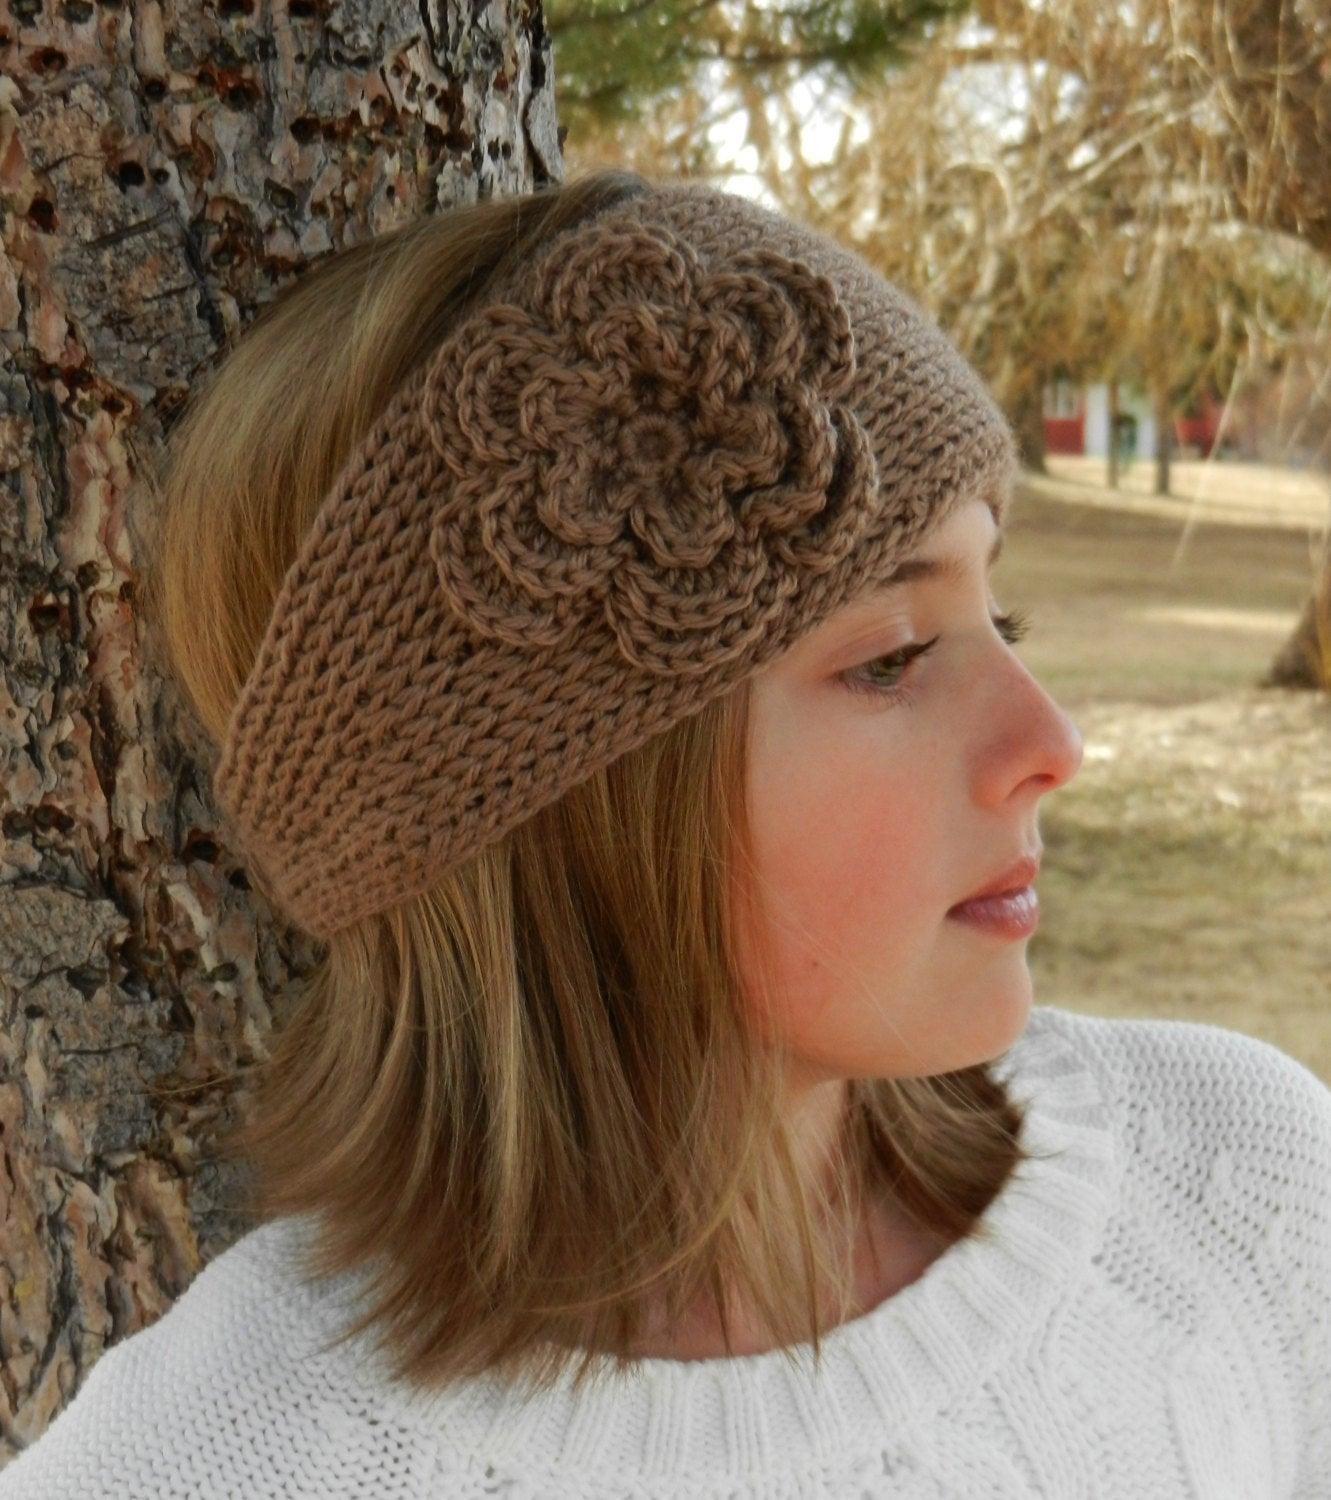 Knit Headband With Flower Pattern Tunisian Knit Look Crochet Headband Pattern With Flower Tunisian Crochet Headband Earwarmer Pattern With Flower Instant Download